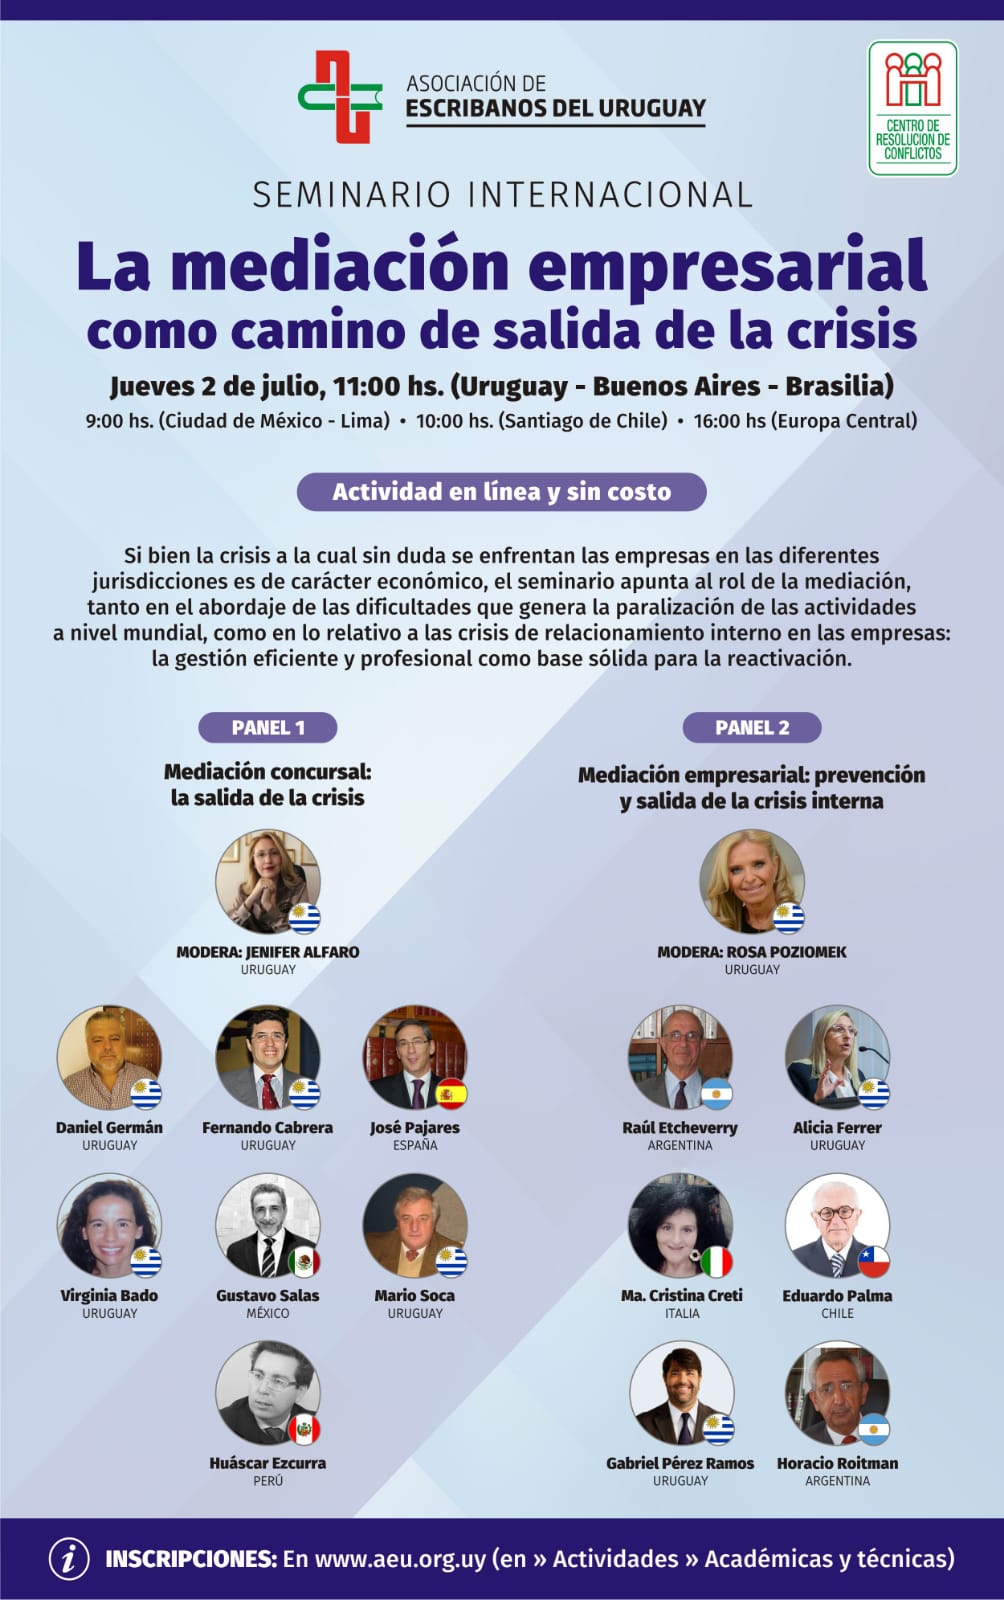 D. José Pajares speaker at the Webinar: Business mediation as a way out of the crisis